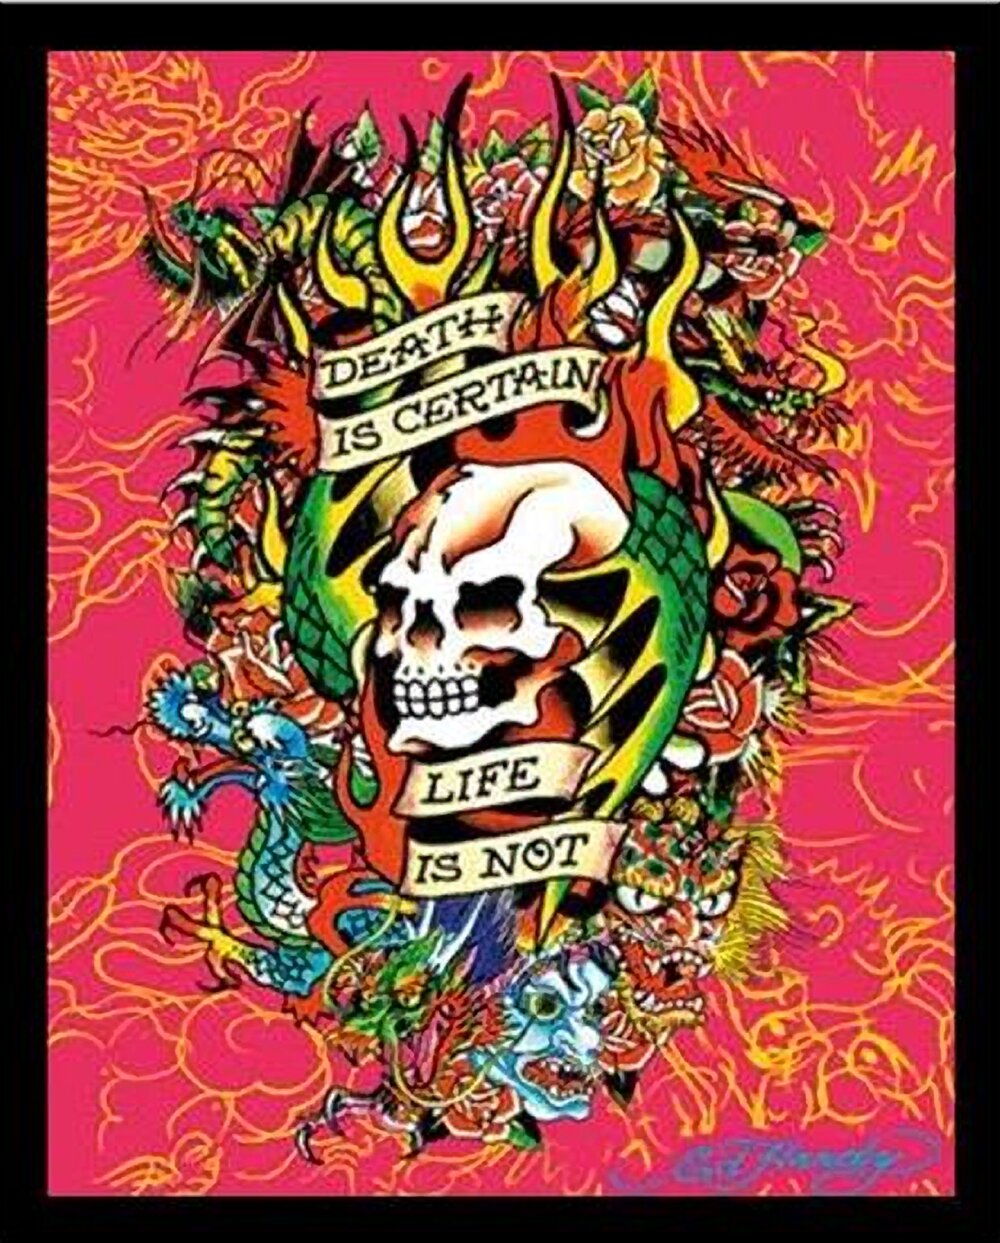 Ed Hardy Death Is Certain - Life Is Not Framed On Paper by Ed Hardy Print